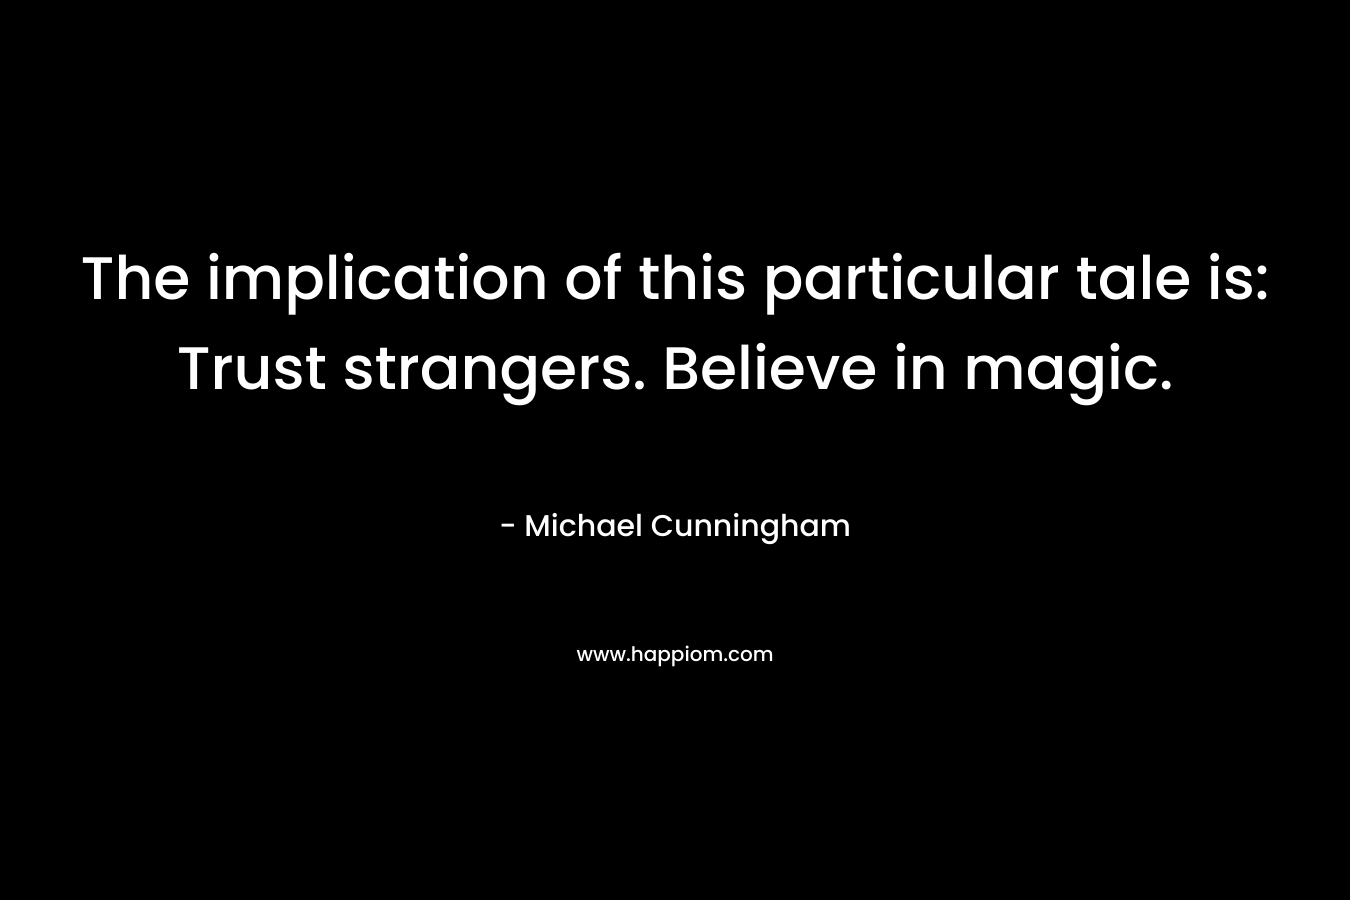 The implication of this particular tale is: Trust strangers. Believe in magic. – Michael Cunningham